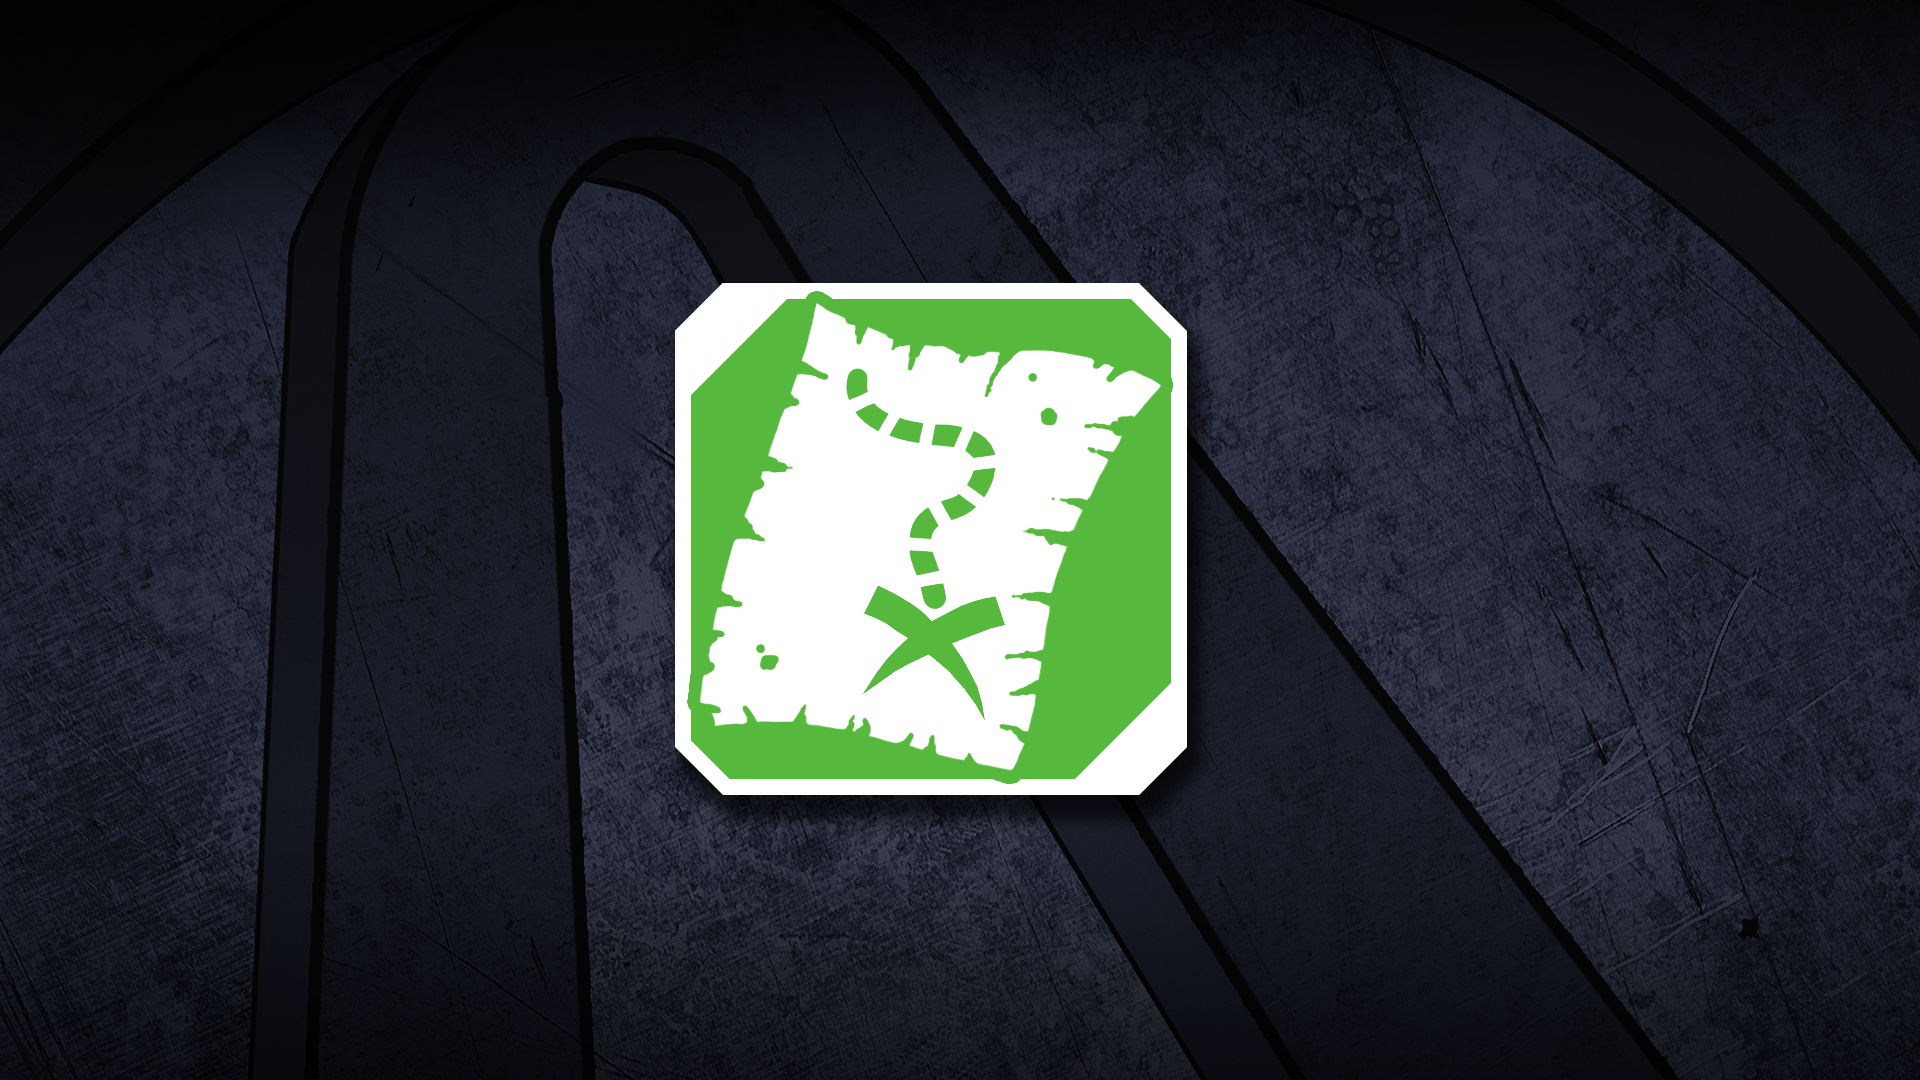 Icon for Discovered The Scrapyard